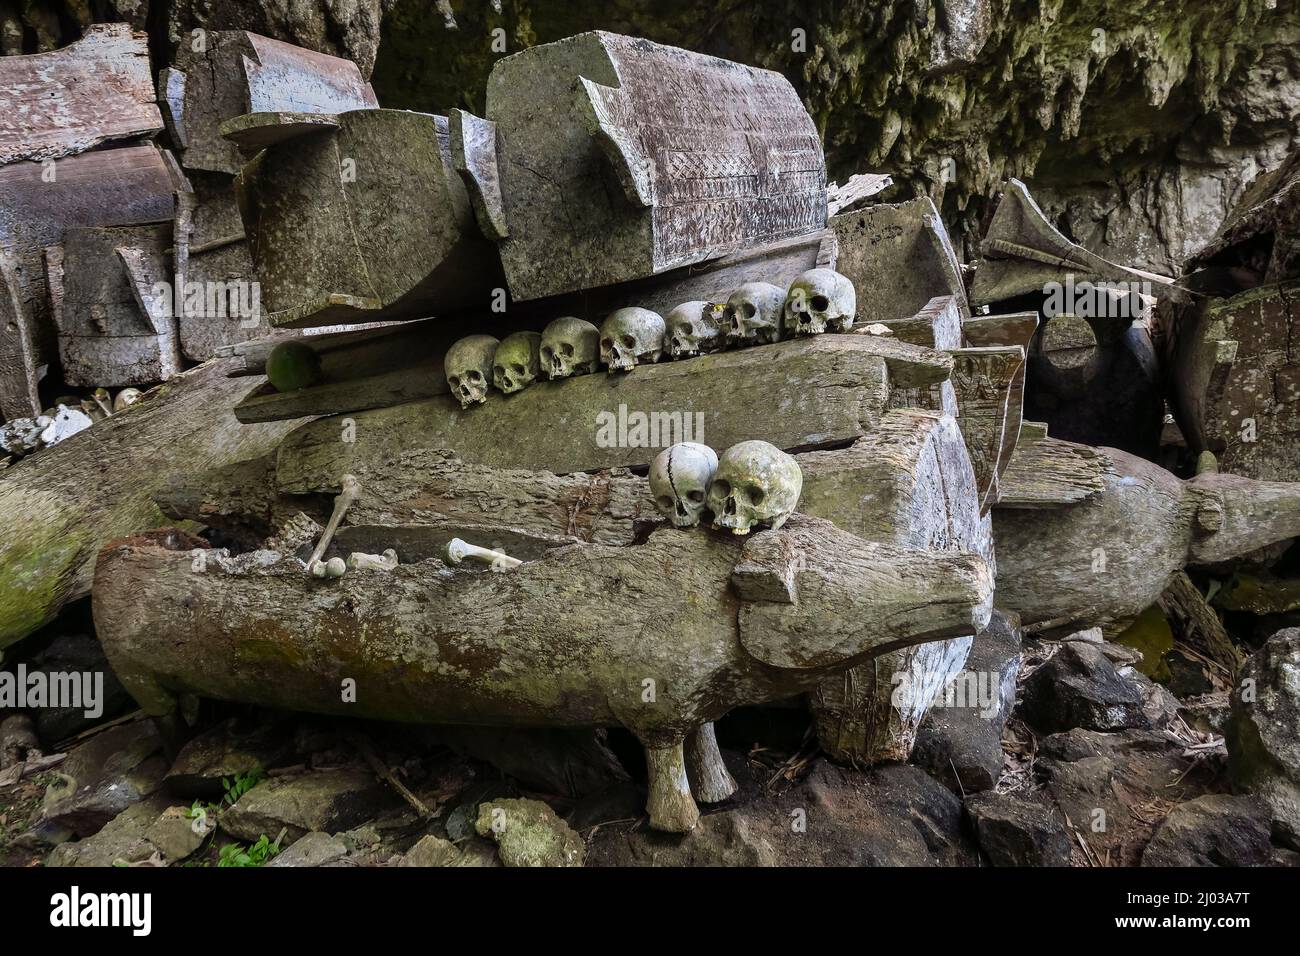 Skulls on coffins in 700 year old burial cave at Parinding, north of Rantepao, Lombok Parinding, Toraja, South Sulawesi, Indonesia Stock Photo